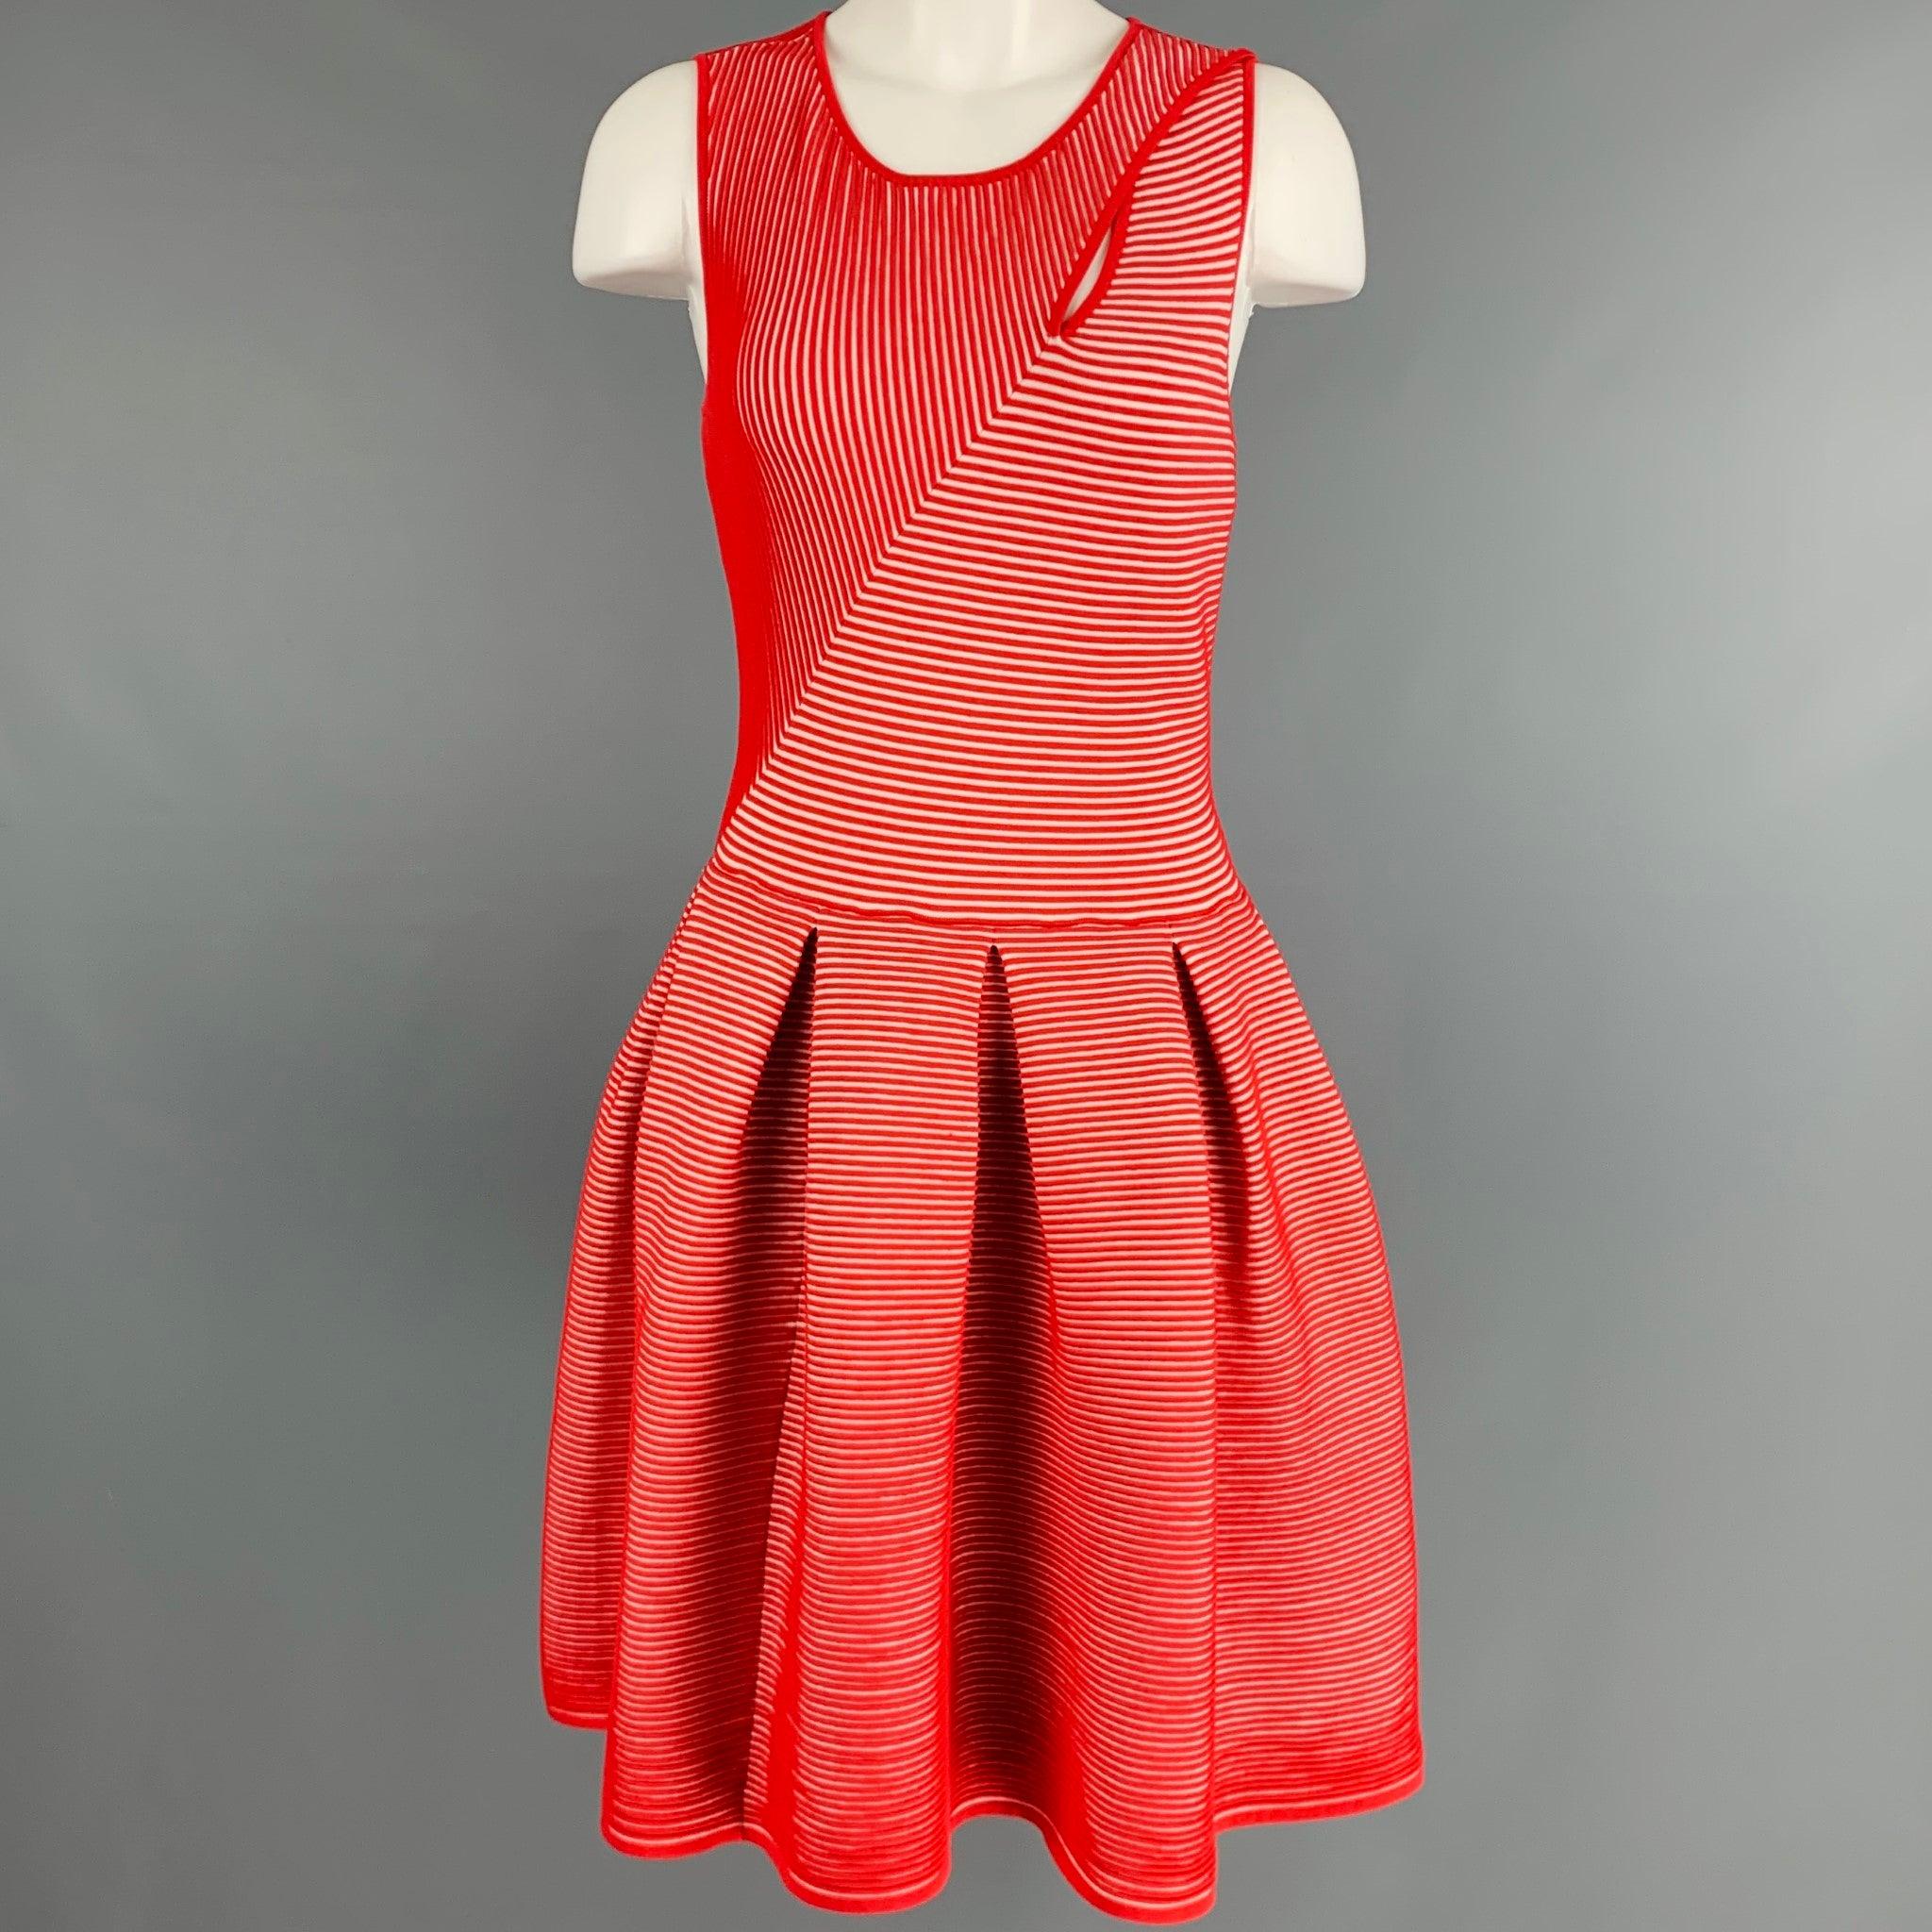 EMPORIO ARMANI dress
in a red and white viscose blend fabric featuring a textured stripe pattern, keyhole shoulder detail, and pleated A-line skirt.Excellent Pre-Owned Condition. 

Marked:  42 

Measurements: 
 
Shoulder: 13.5 inches Bust: 31 inches